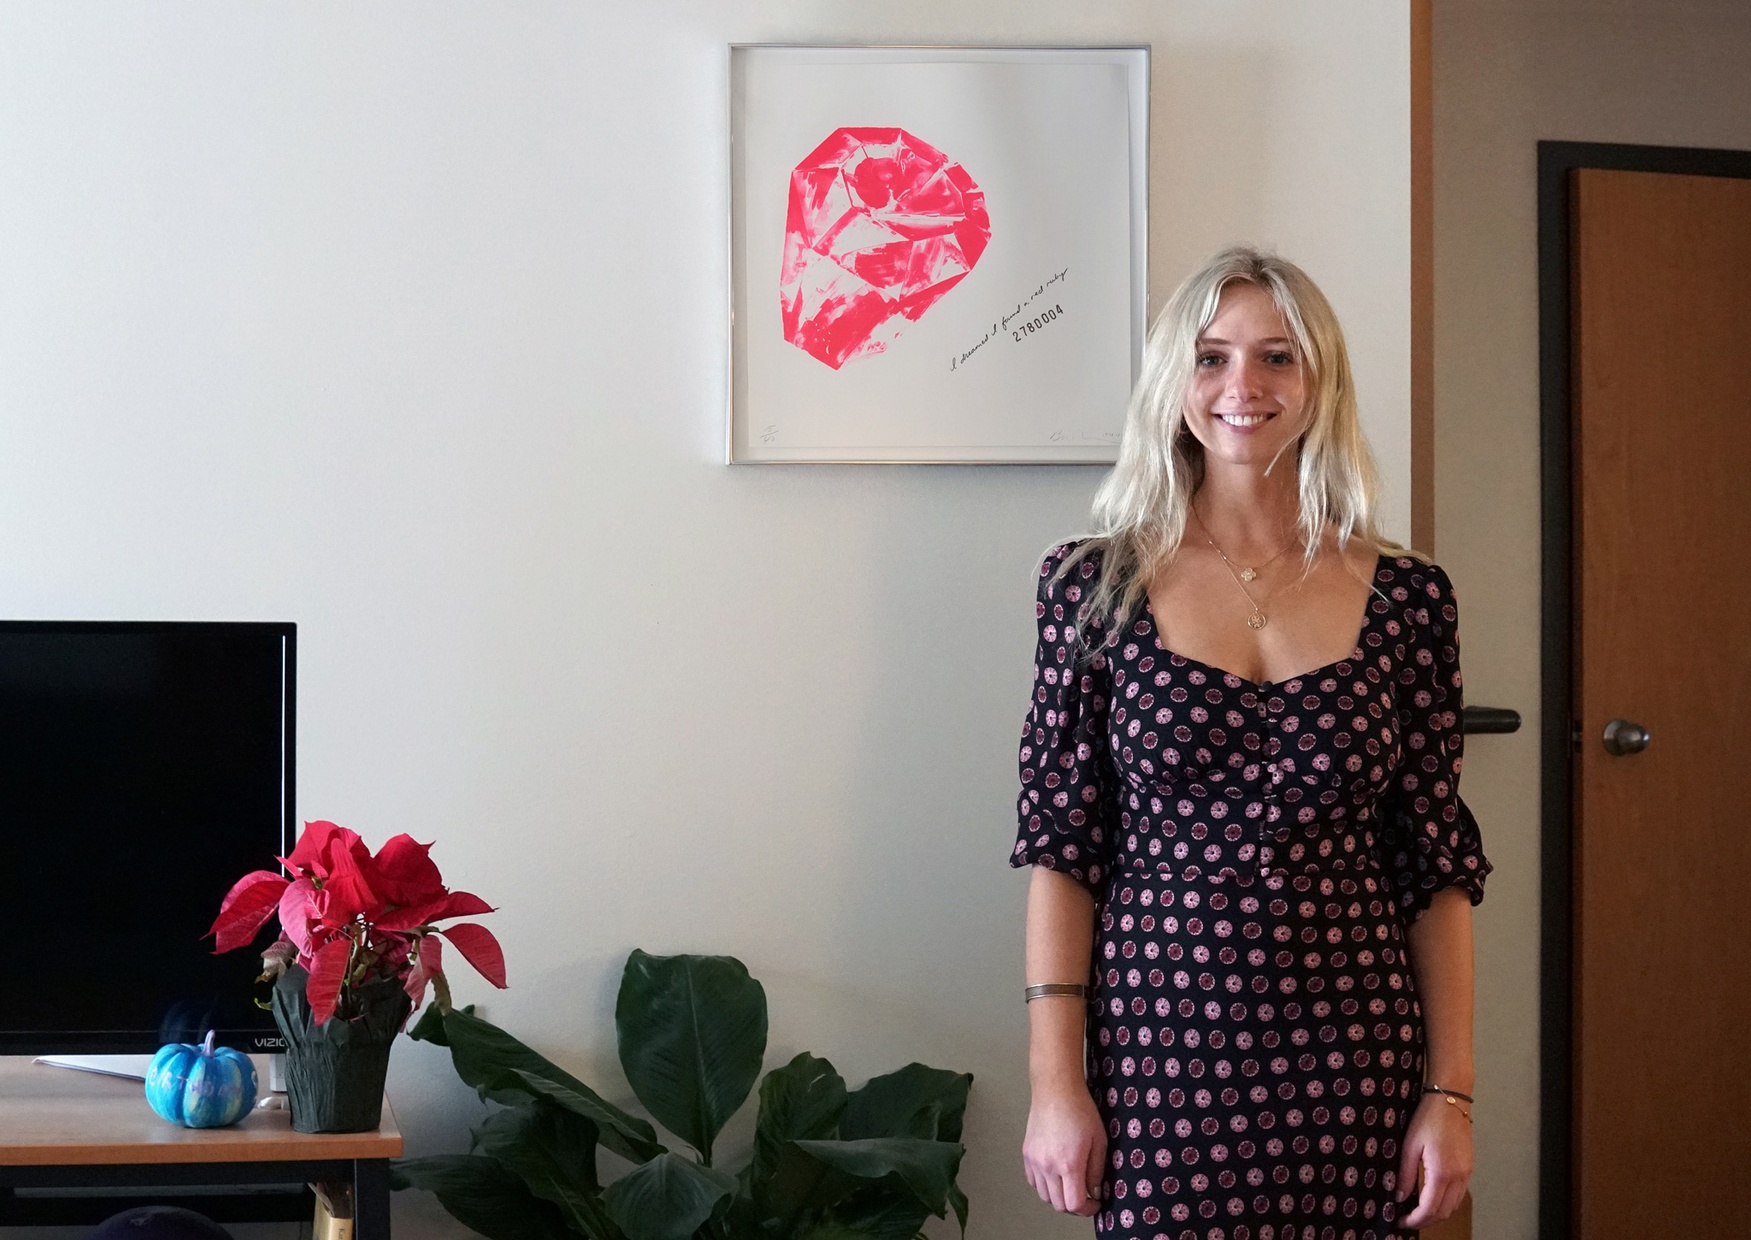 A student stands in her living room next to a framed artwork hung on the wall. The artwork has a white background with a hot pink diamond-like shape in the center left